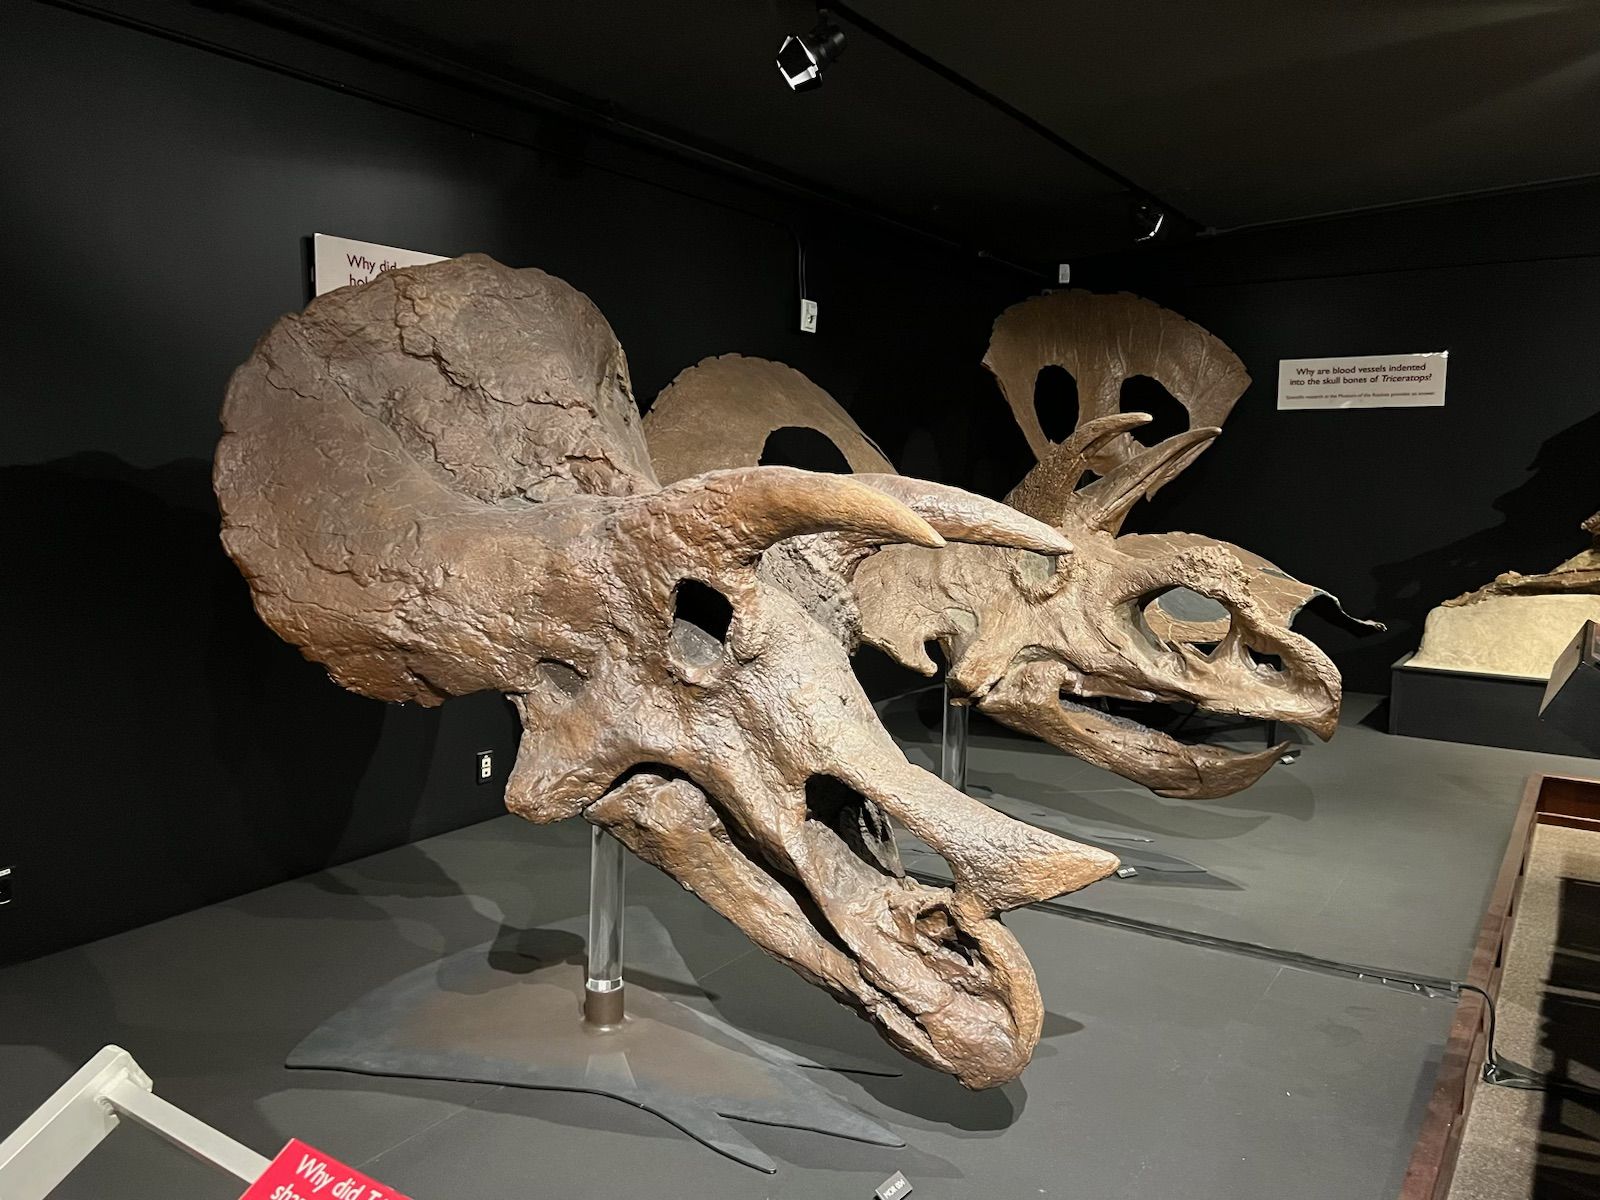 Two dinosaur skulls are on display in a museum.